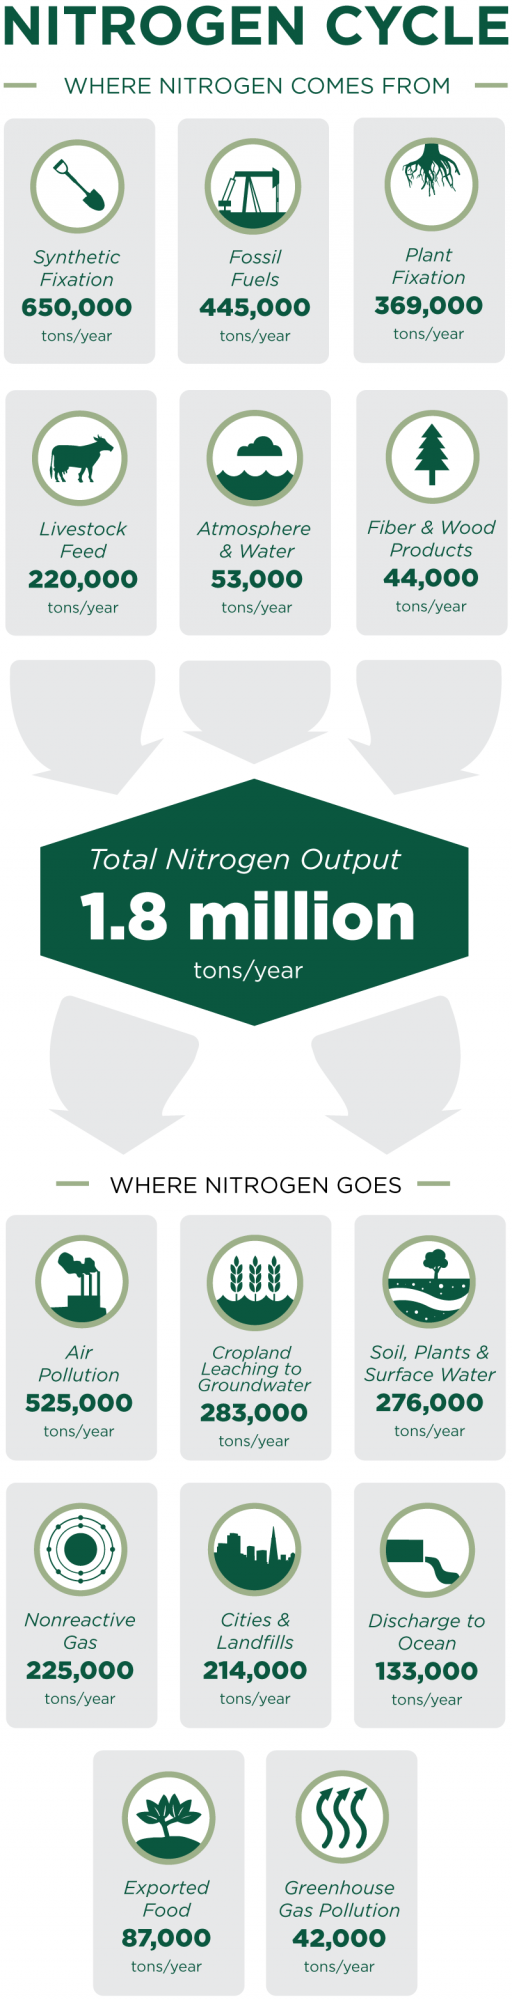 Nitrogen Cycle - The main source of nitrogen in California is Synthetic Fixation via fertilizer at 650,000 tons/year, other sources include fossil fuels and plant fixation - total output per year is 1.8 million tons - most of this becomes air pollution to the tune of 525,000 tons per year, other destinations include - groundwater, landfills, food, and greenhouse gases